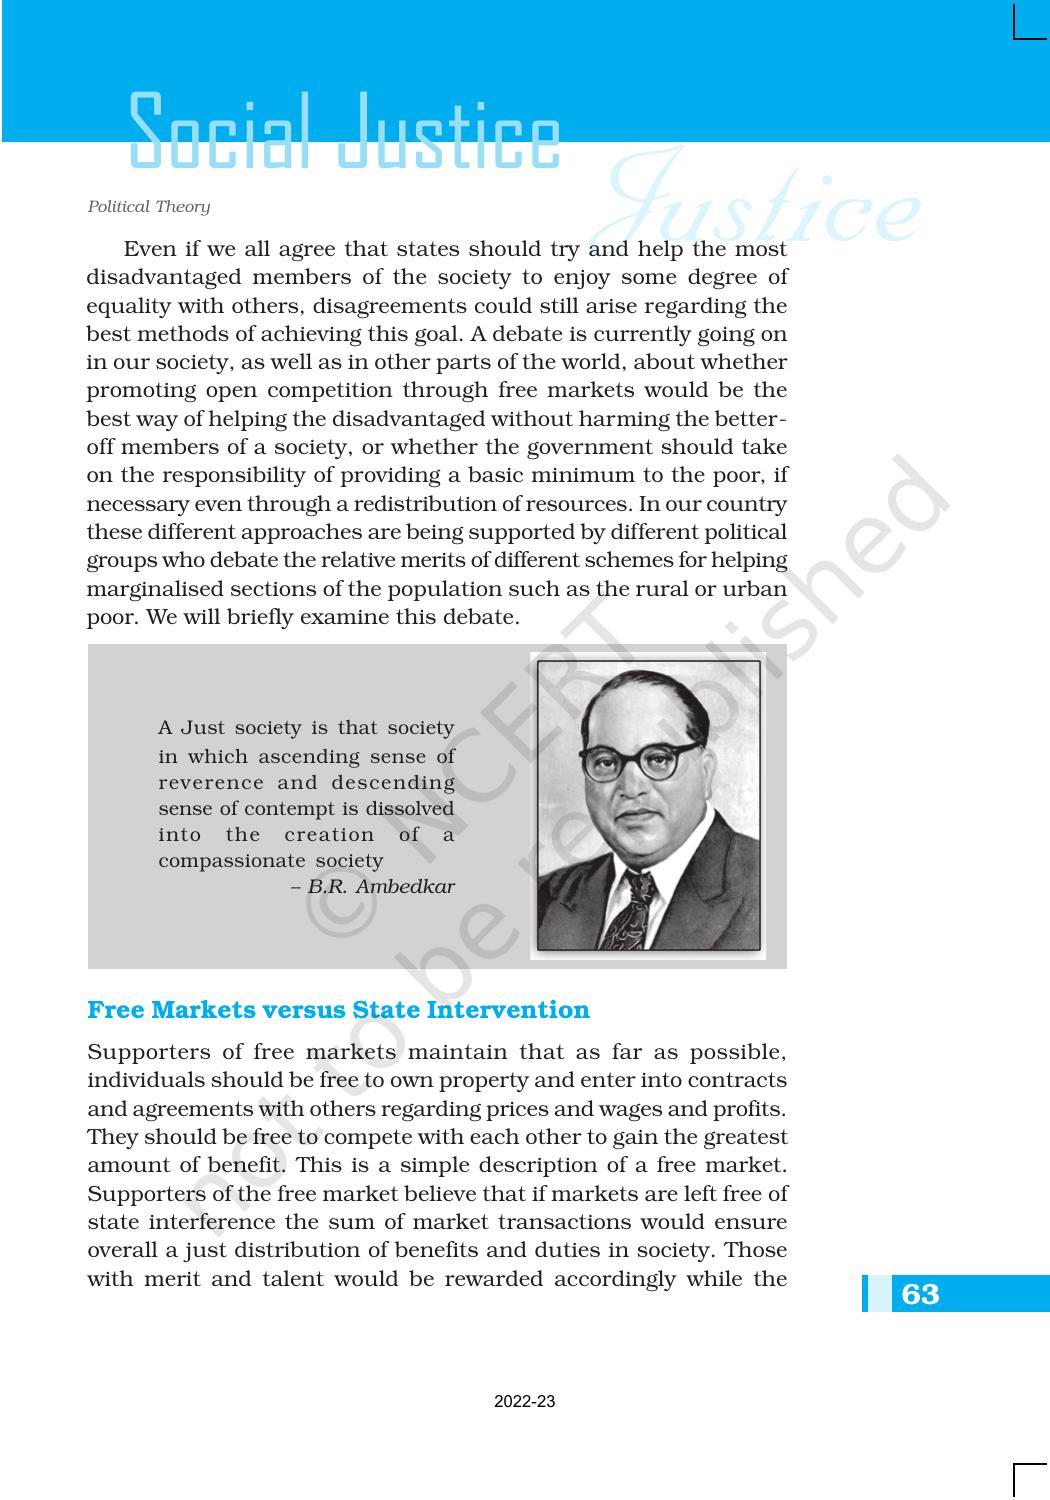 NCERT Book for Class 11 Political Science (Political Theory) Chapter 4 Social Justice - Page 11